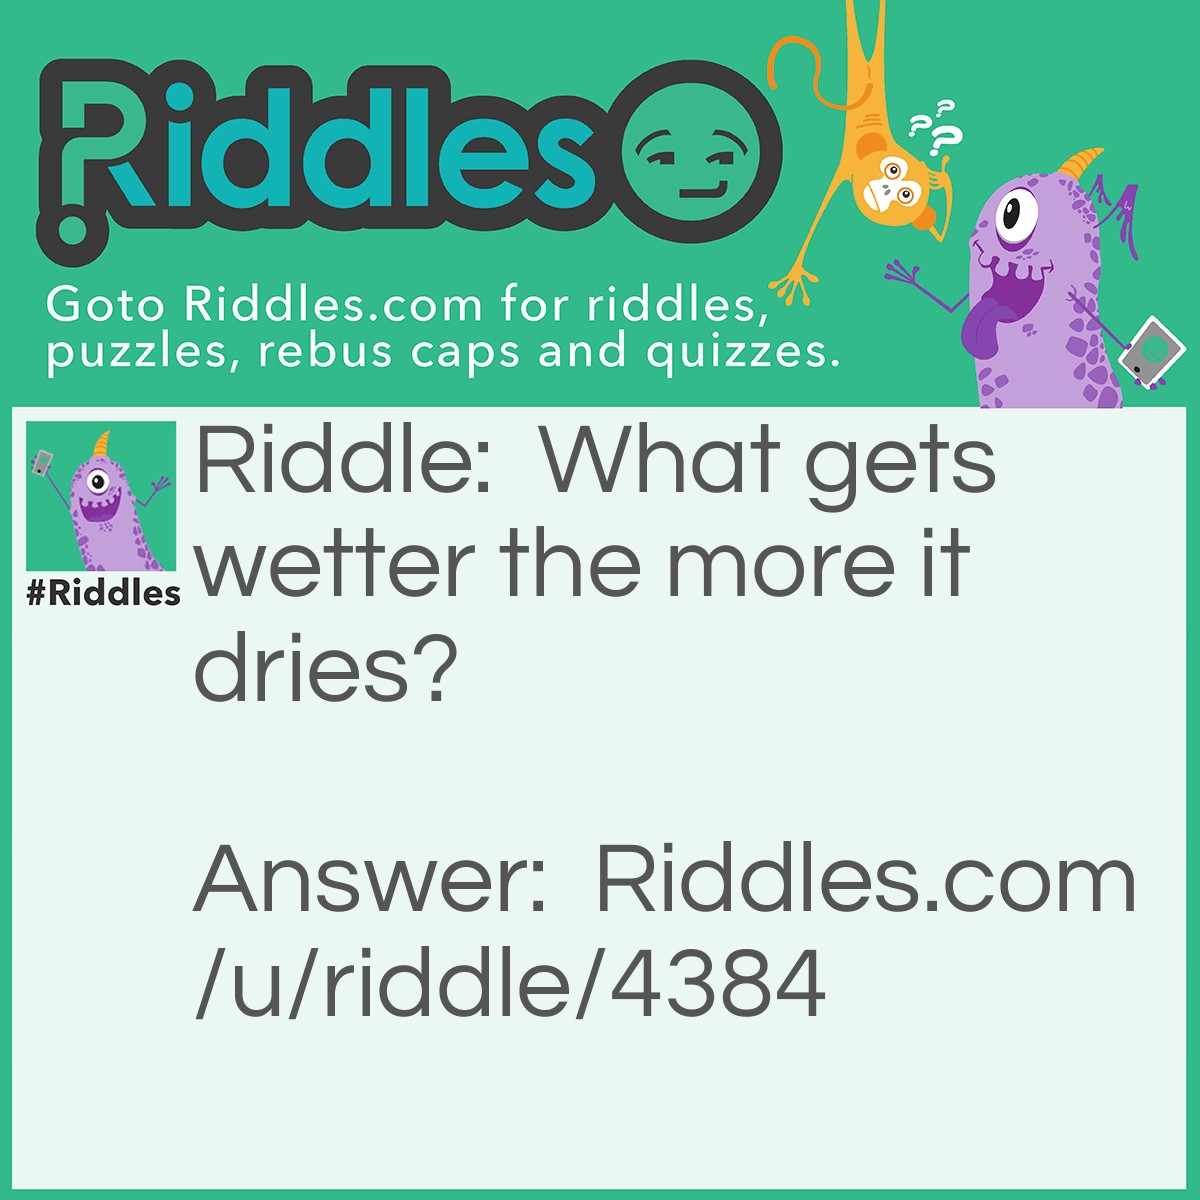 Riddle: What gets wetter the more it dries? Answer: A towel.